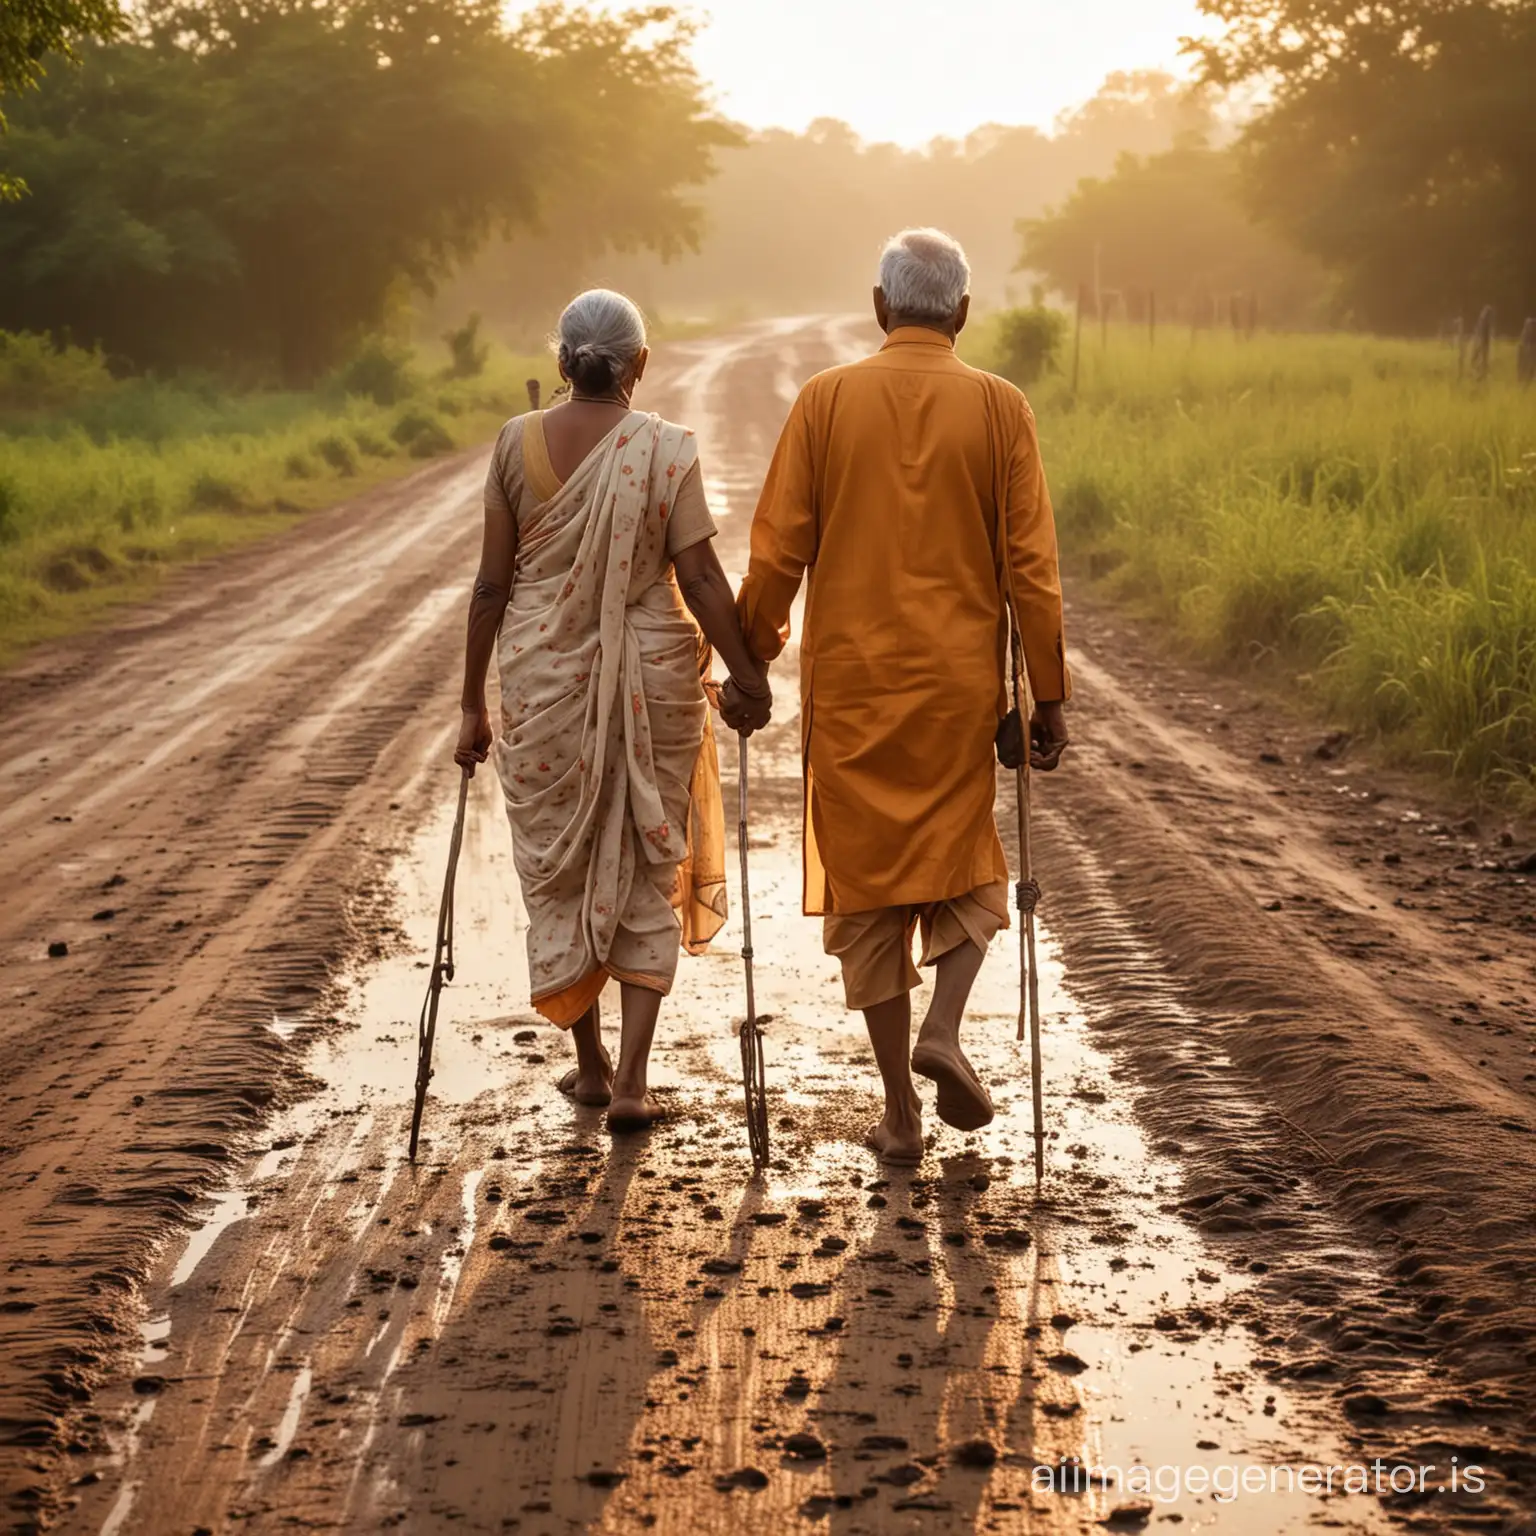 behind the camera An indian Old age couple walking on a muddy road with setting sun on his back drop, with a walking stick in one hand. His dress is not new, a woman passing him, Indian village as theme